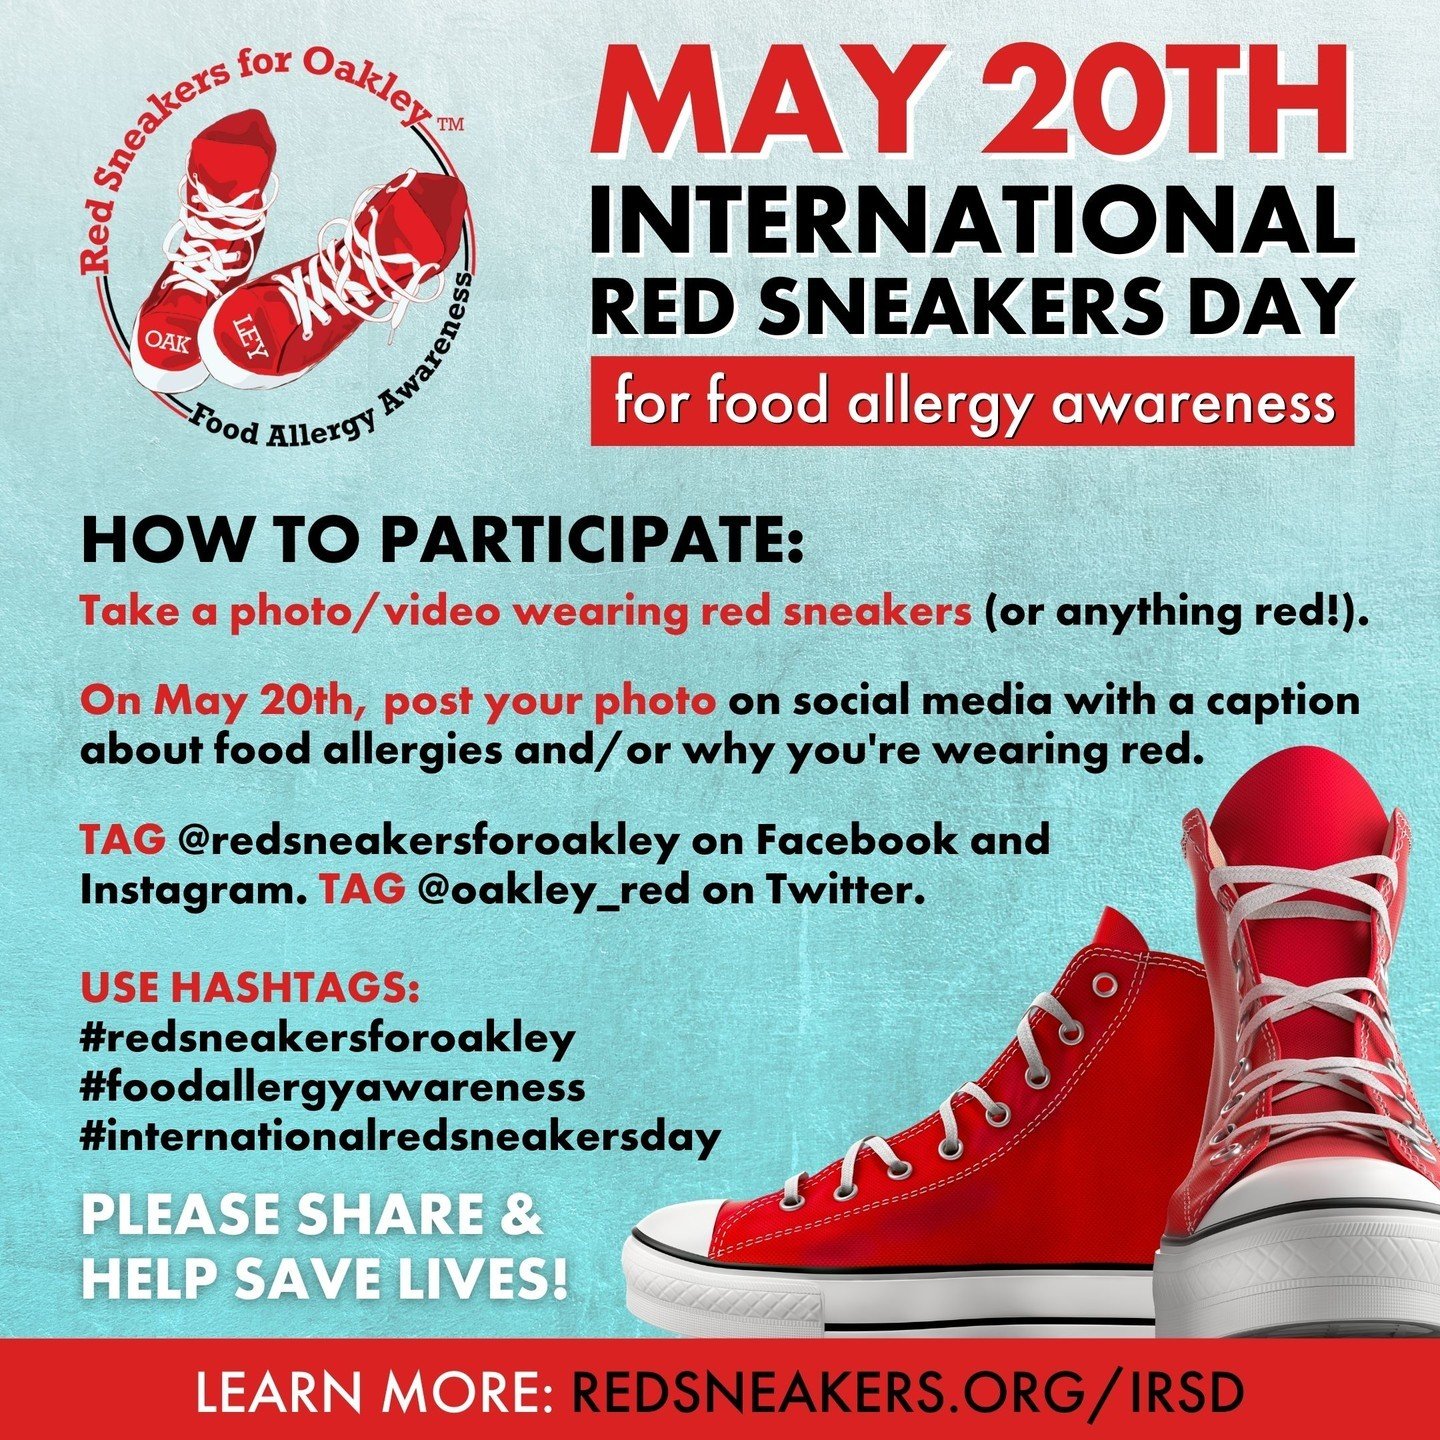 Get your red sneakers ready! International Red Sneakers Day (May 20th) is just a few days away! It's a special day to spread food allergy awareness.

HOW CAN YOU GET INVOLVED?

It's so easy! Take a photo of yourself in red sneakers or shoes (or anyth